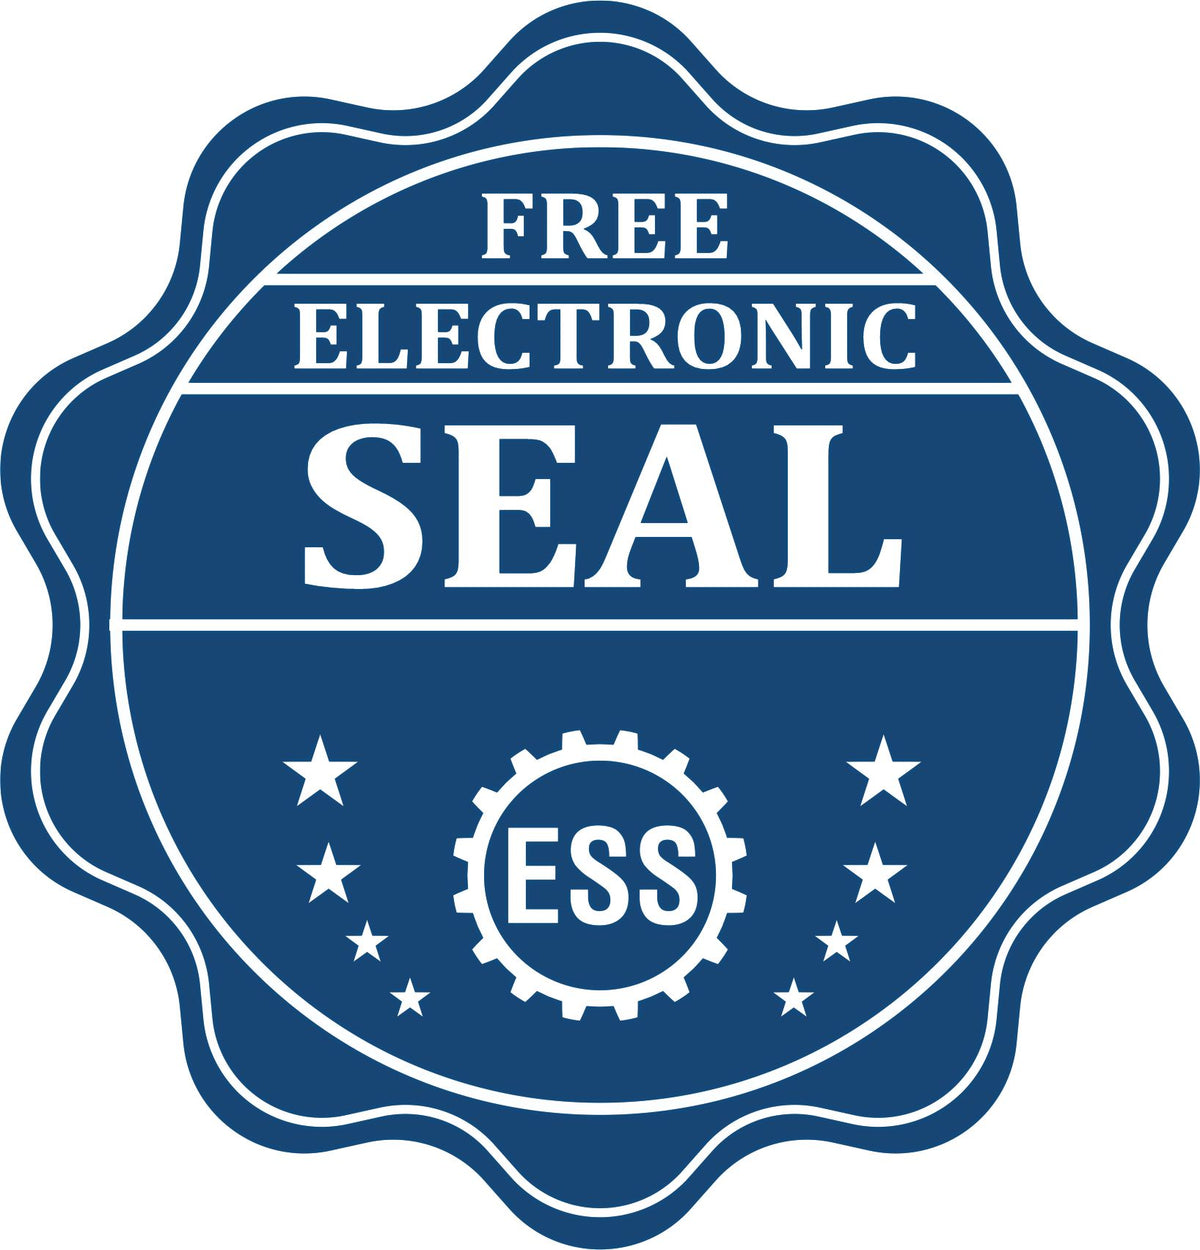 A badge showing a free electronic seal for the New Hampshire Desk Architect Embossing Seal with stars and the ESS gear on the emblem.